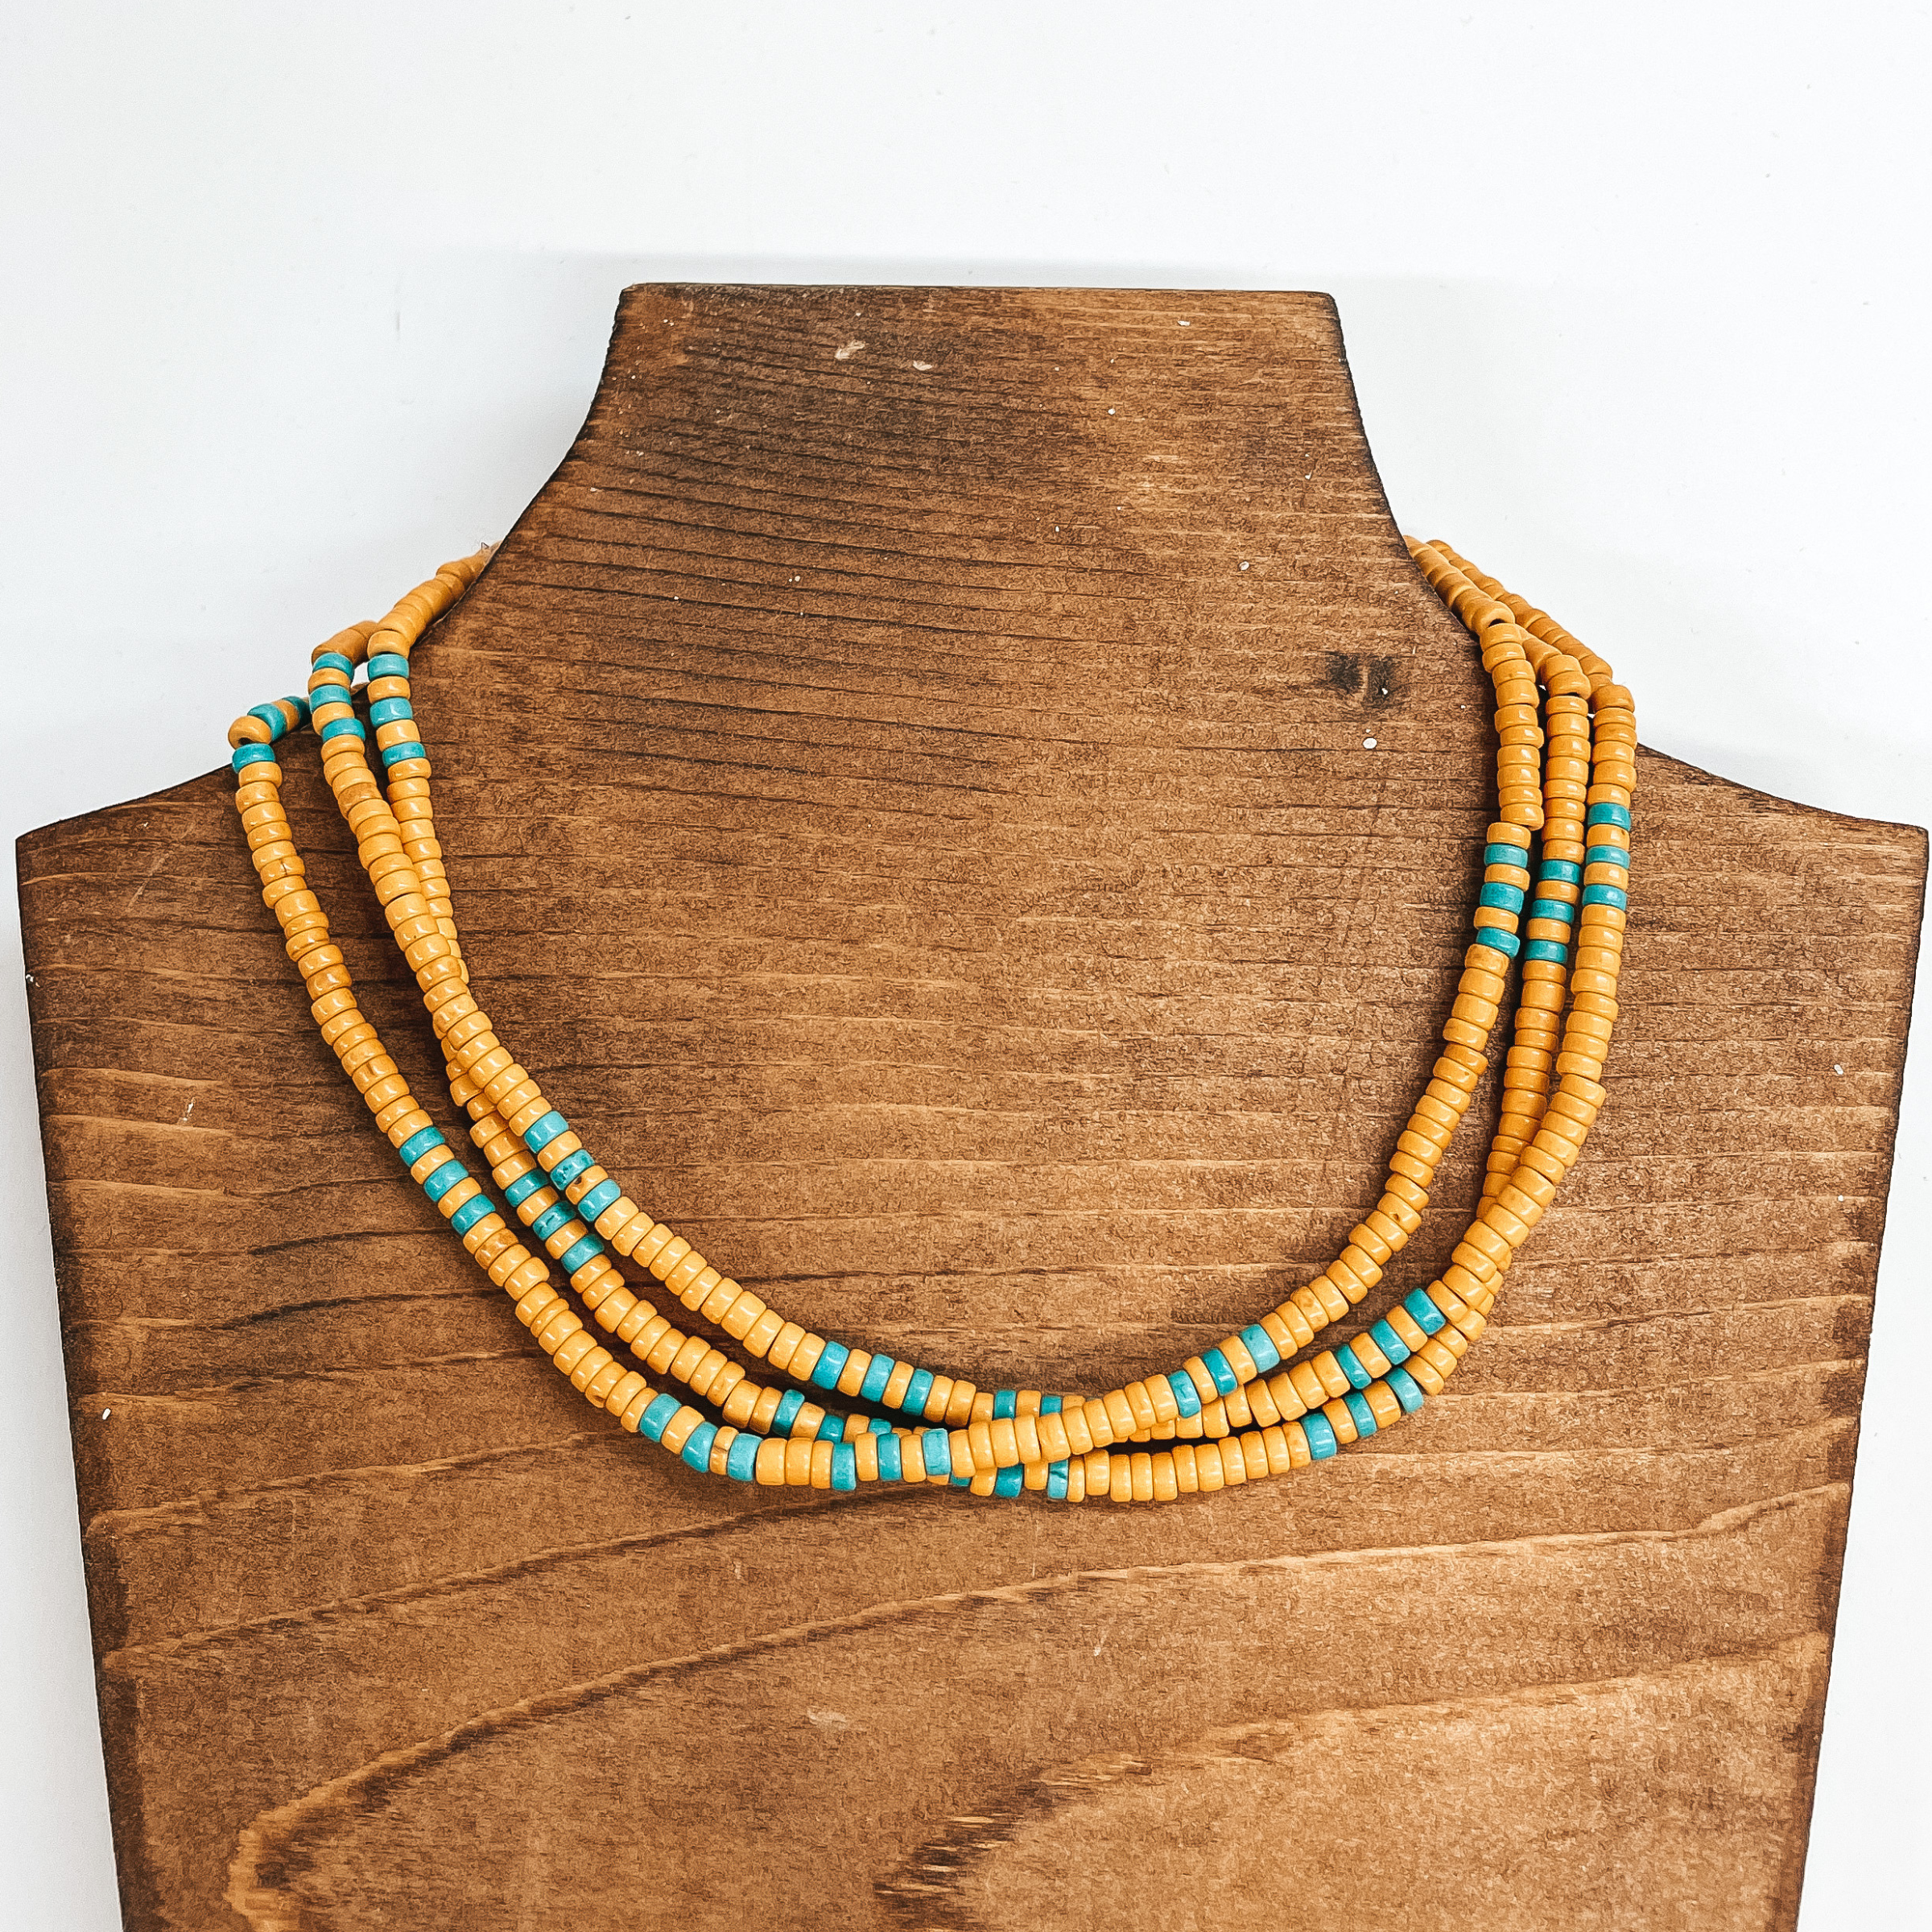 Three strand beaded choker necklace with yellow  and turquoise beads. The necklace is taken on a  brown block and a white background.